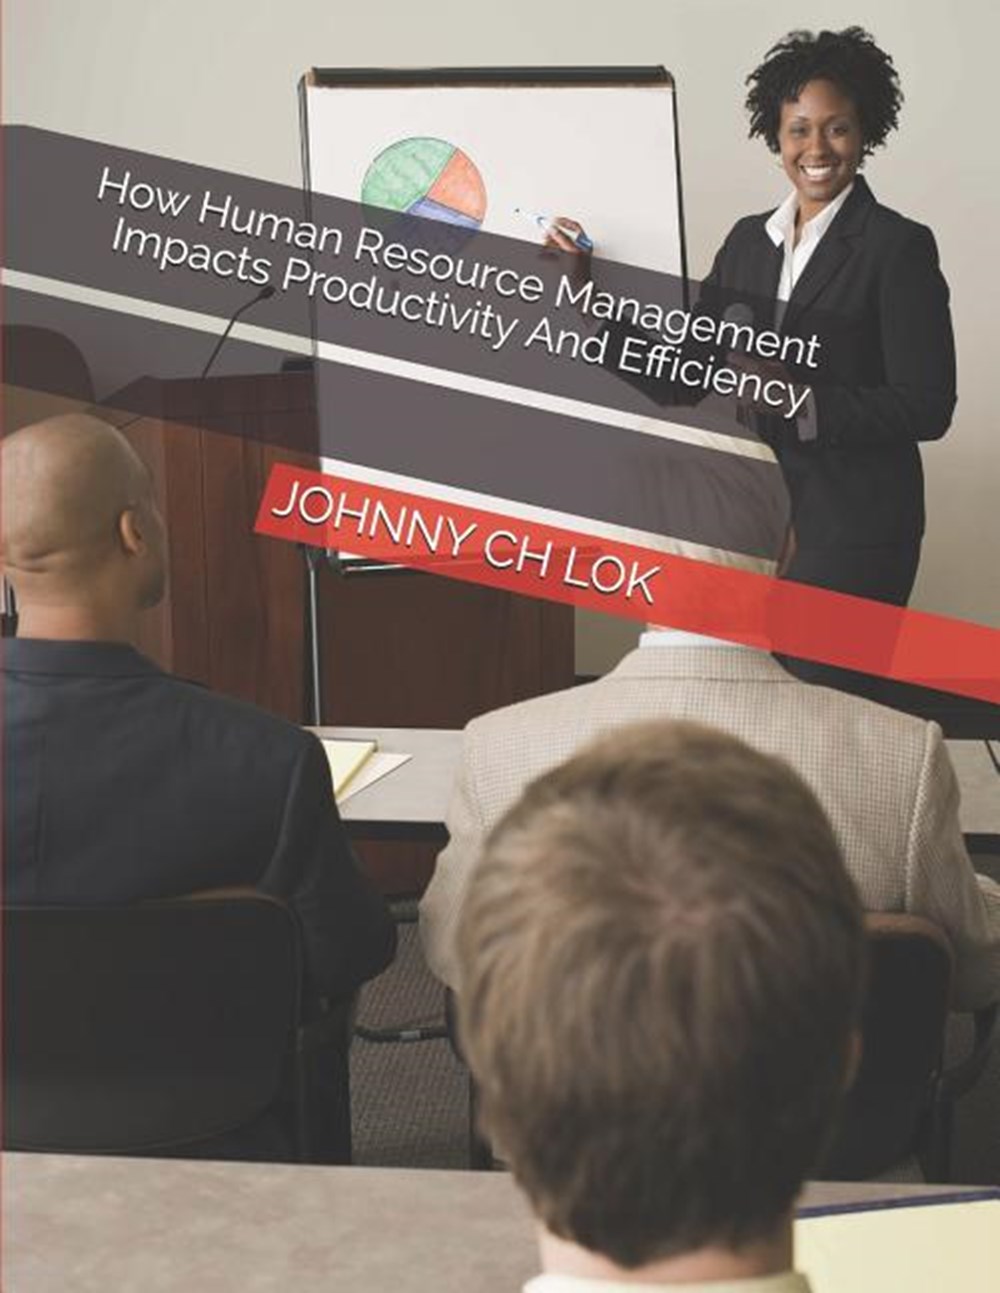 How Human Resource Management Impacts Productivity and Efficiency